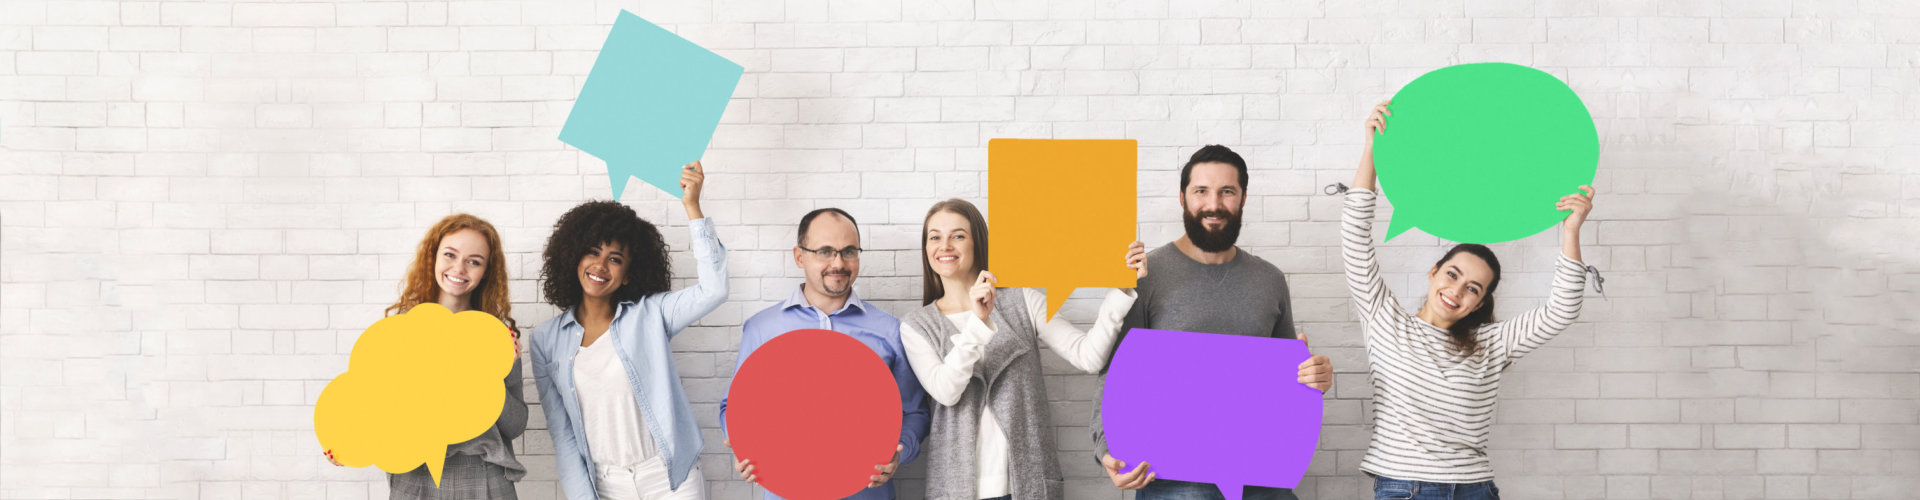 Group of diverse people holding colorful speech bubbles